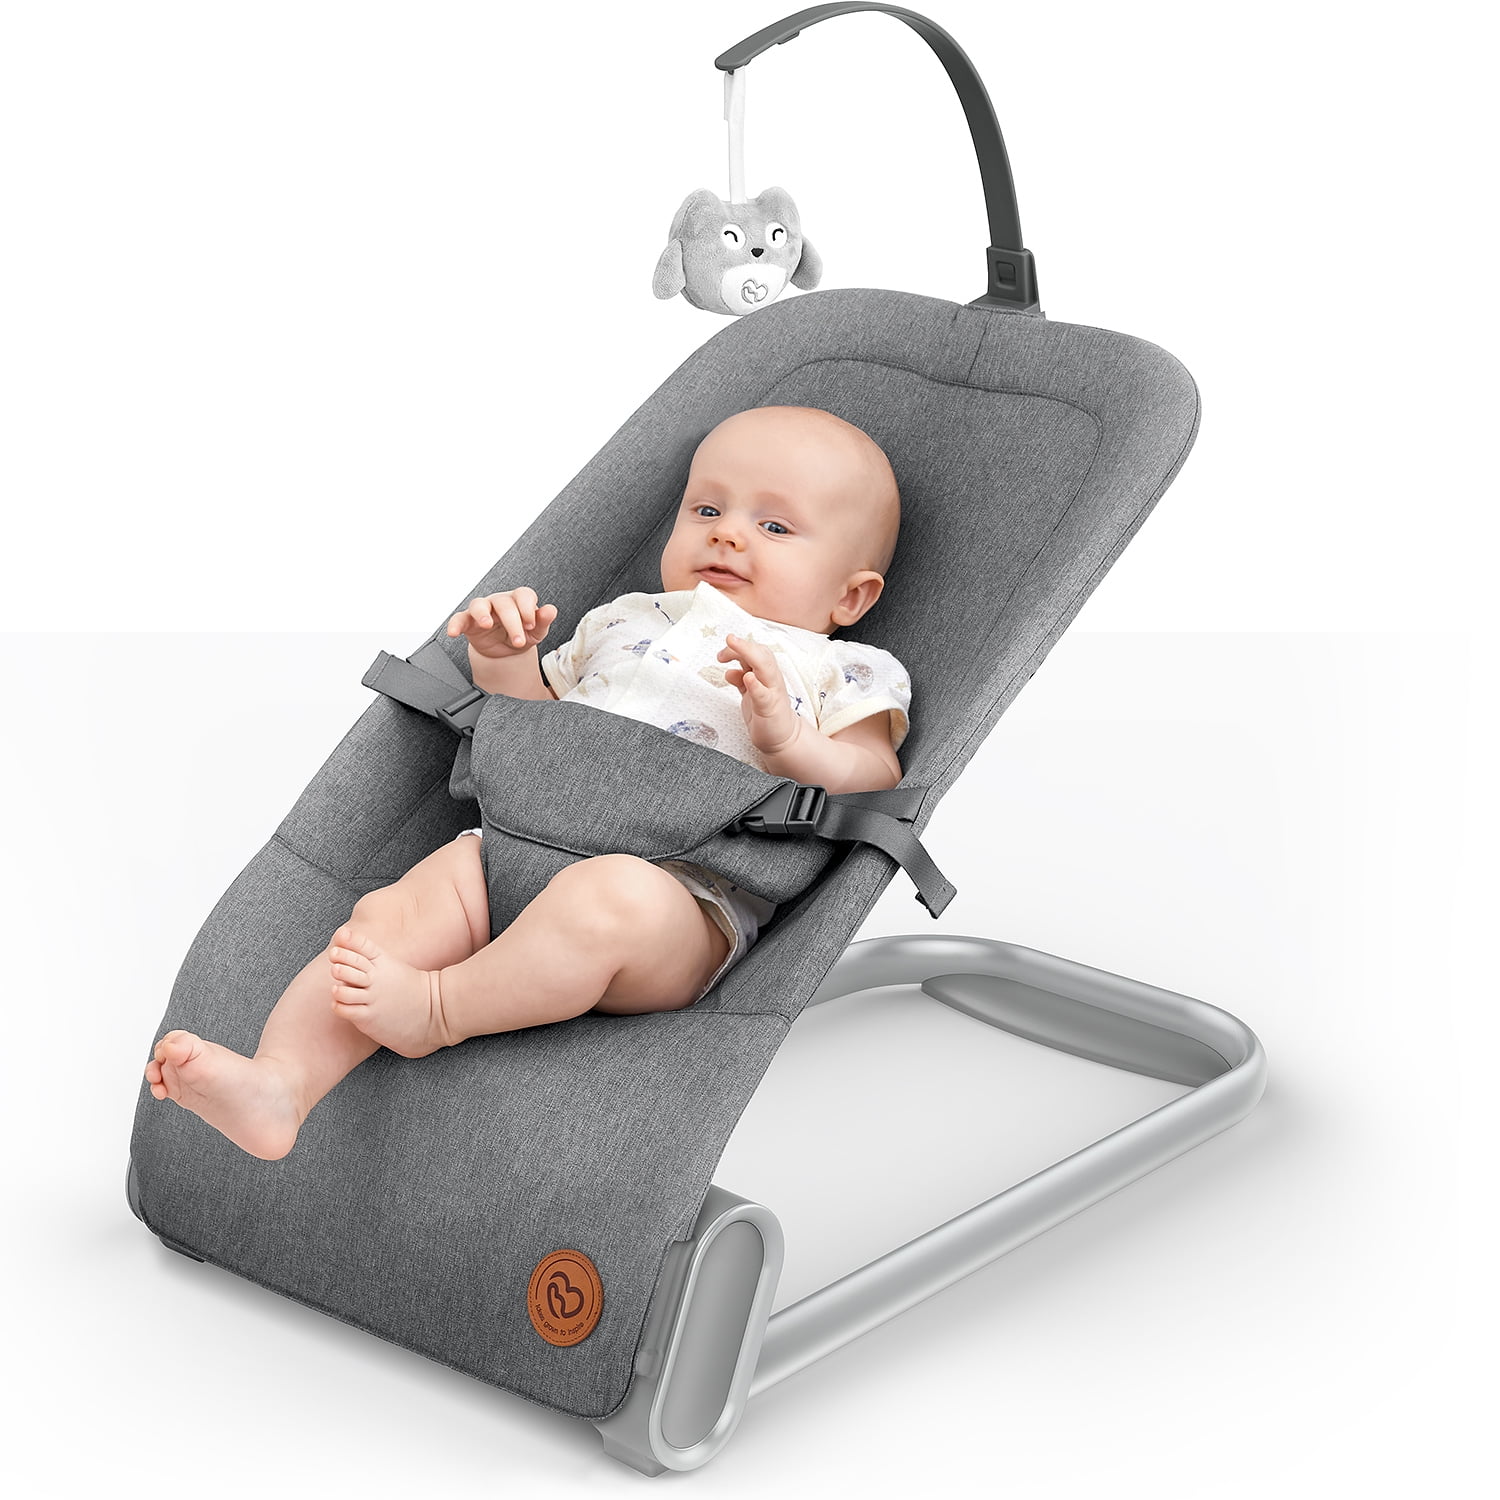 Baby Bouncer Seat for Infants, BabyBond Baby Bouncer with Sturdy